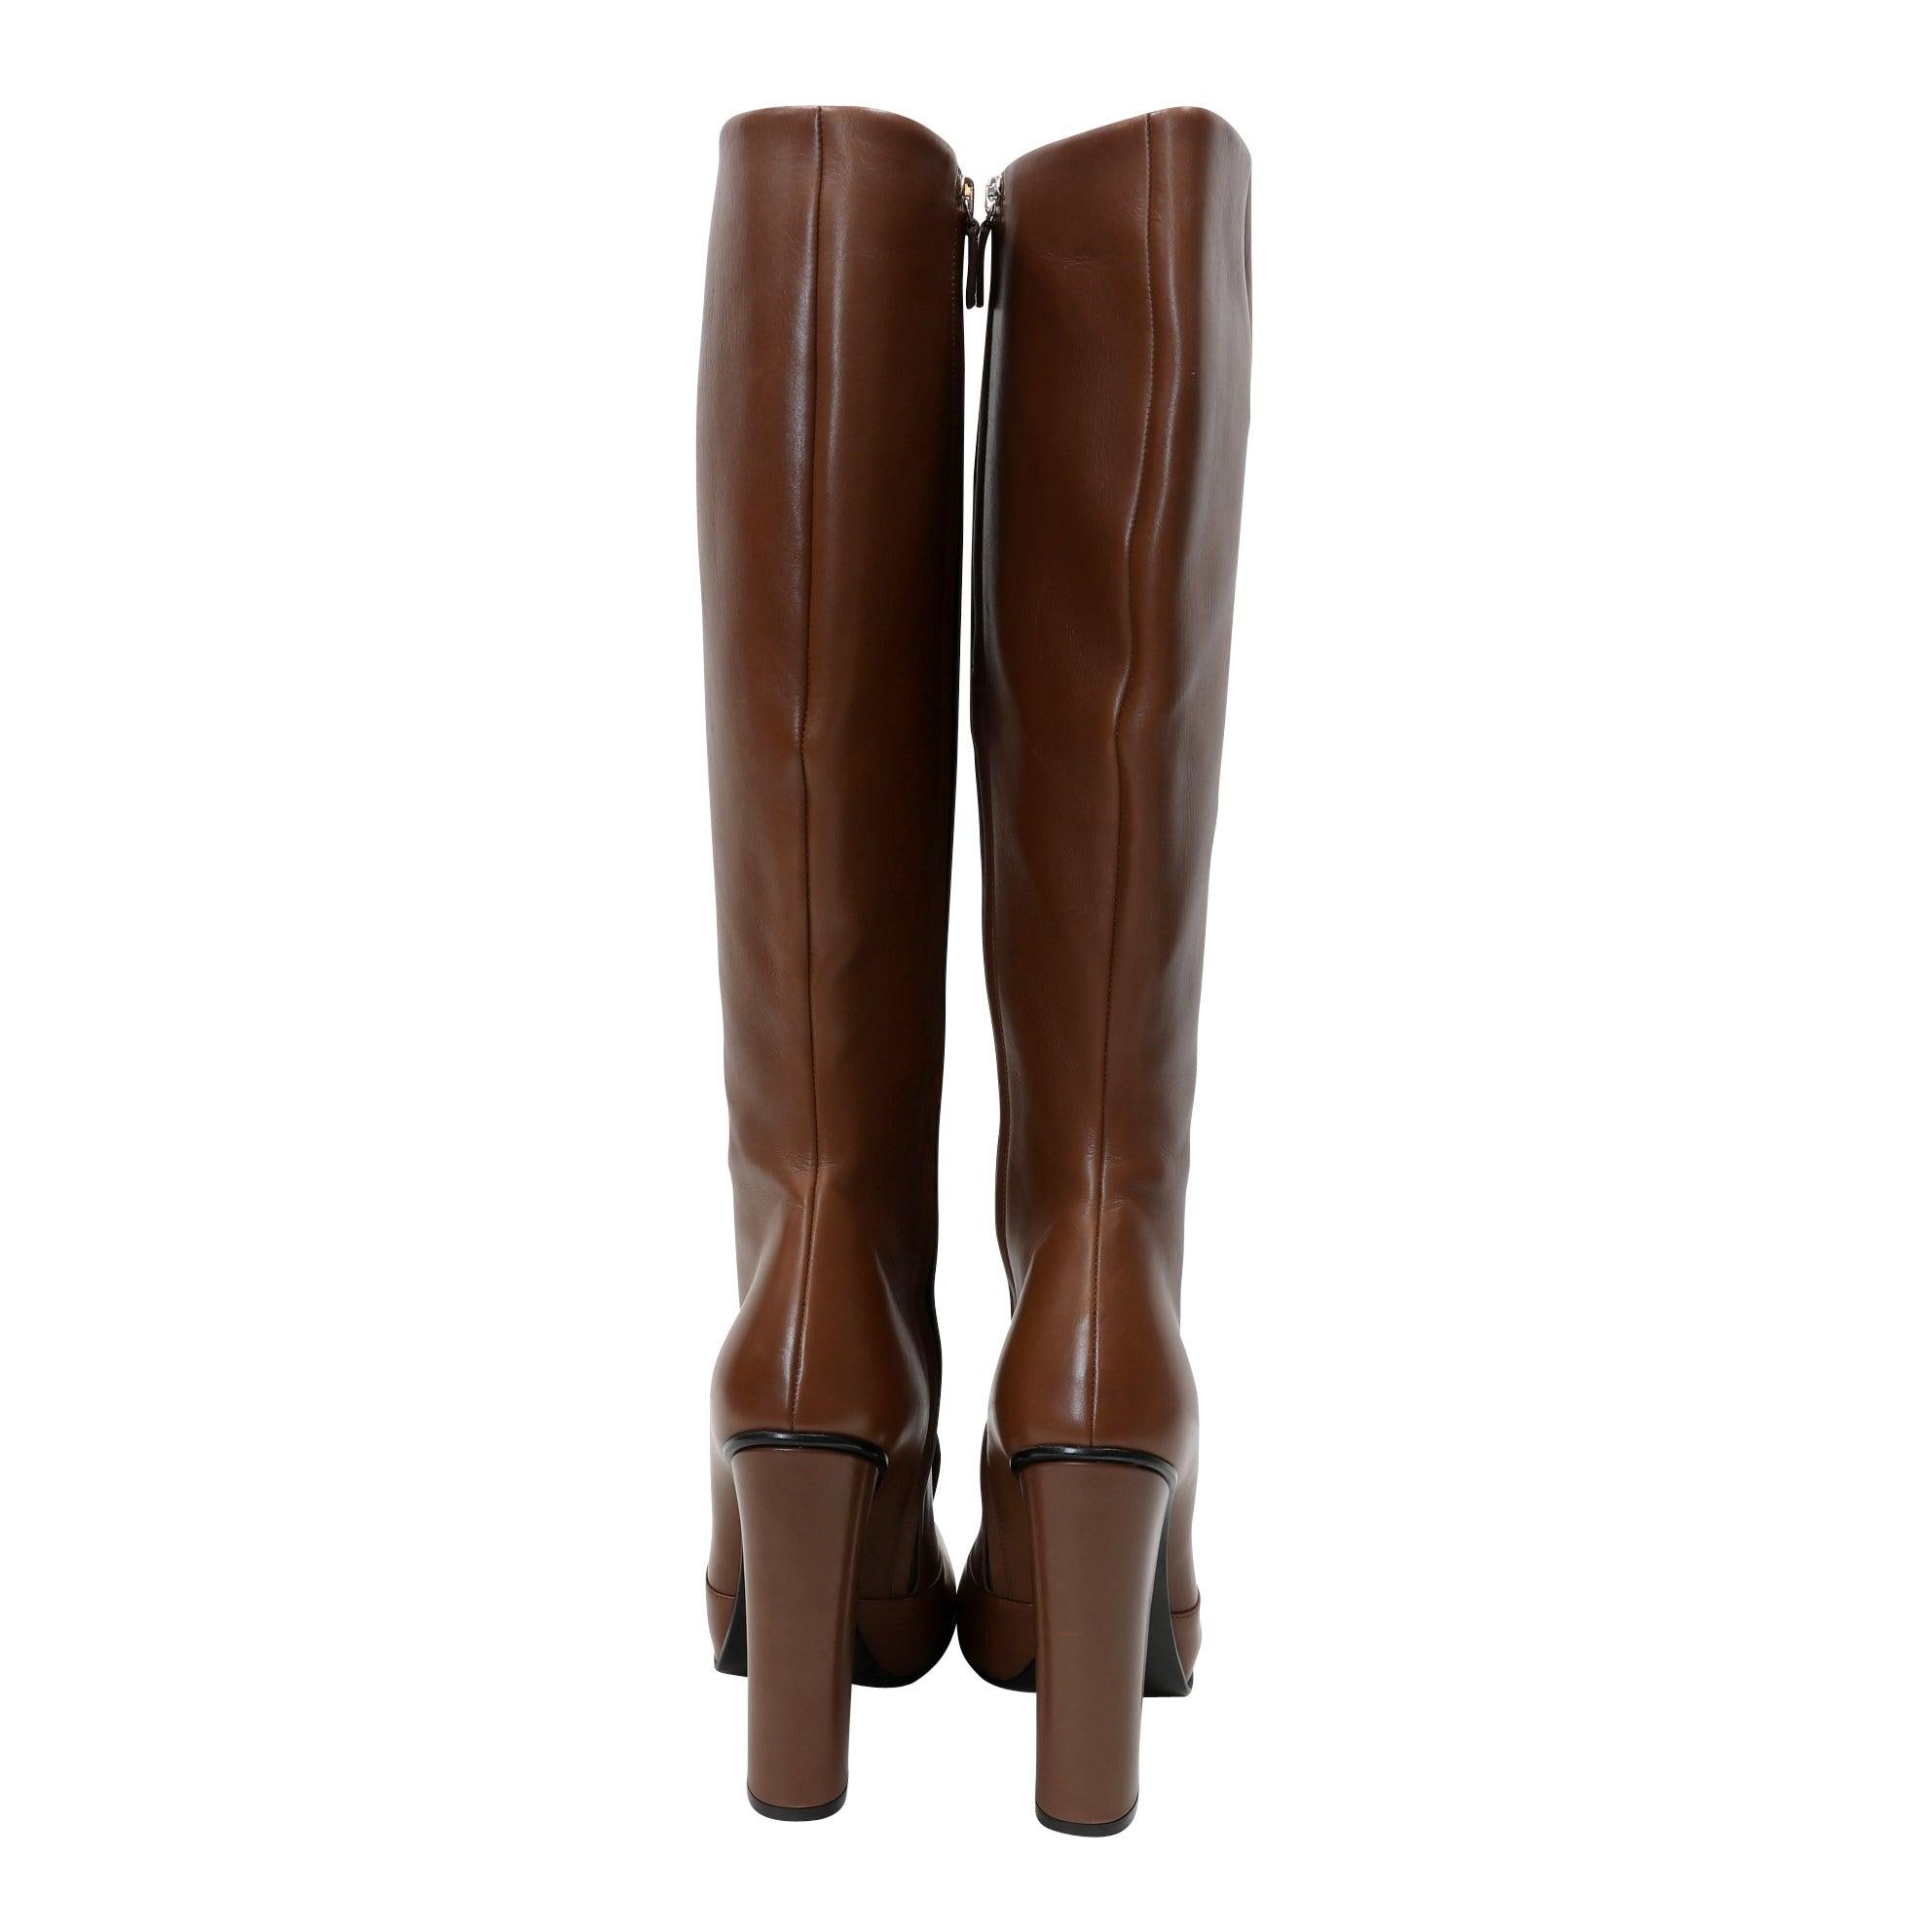 Gucci Brown Leather Horsebit Knee High Riding Boots 39.5 GG-S1111P-0001 For Sale 1